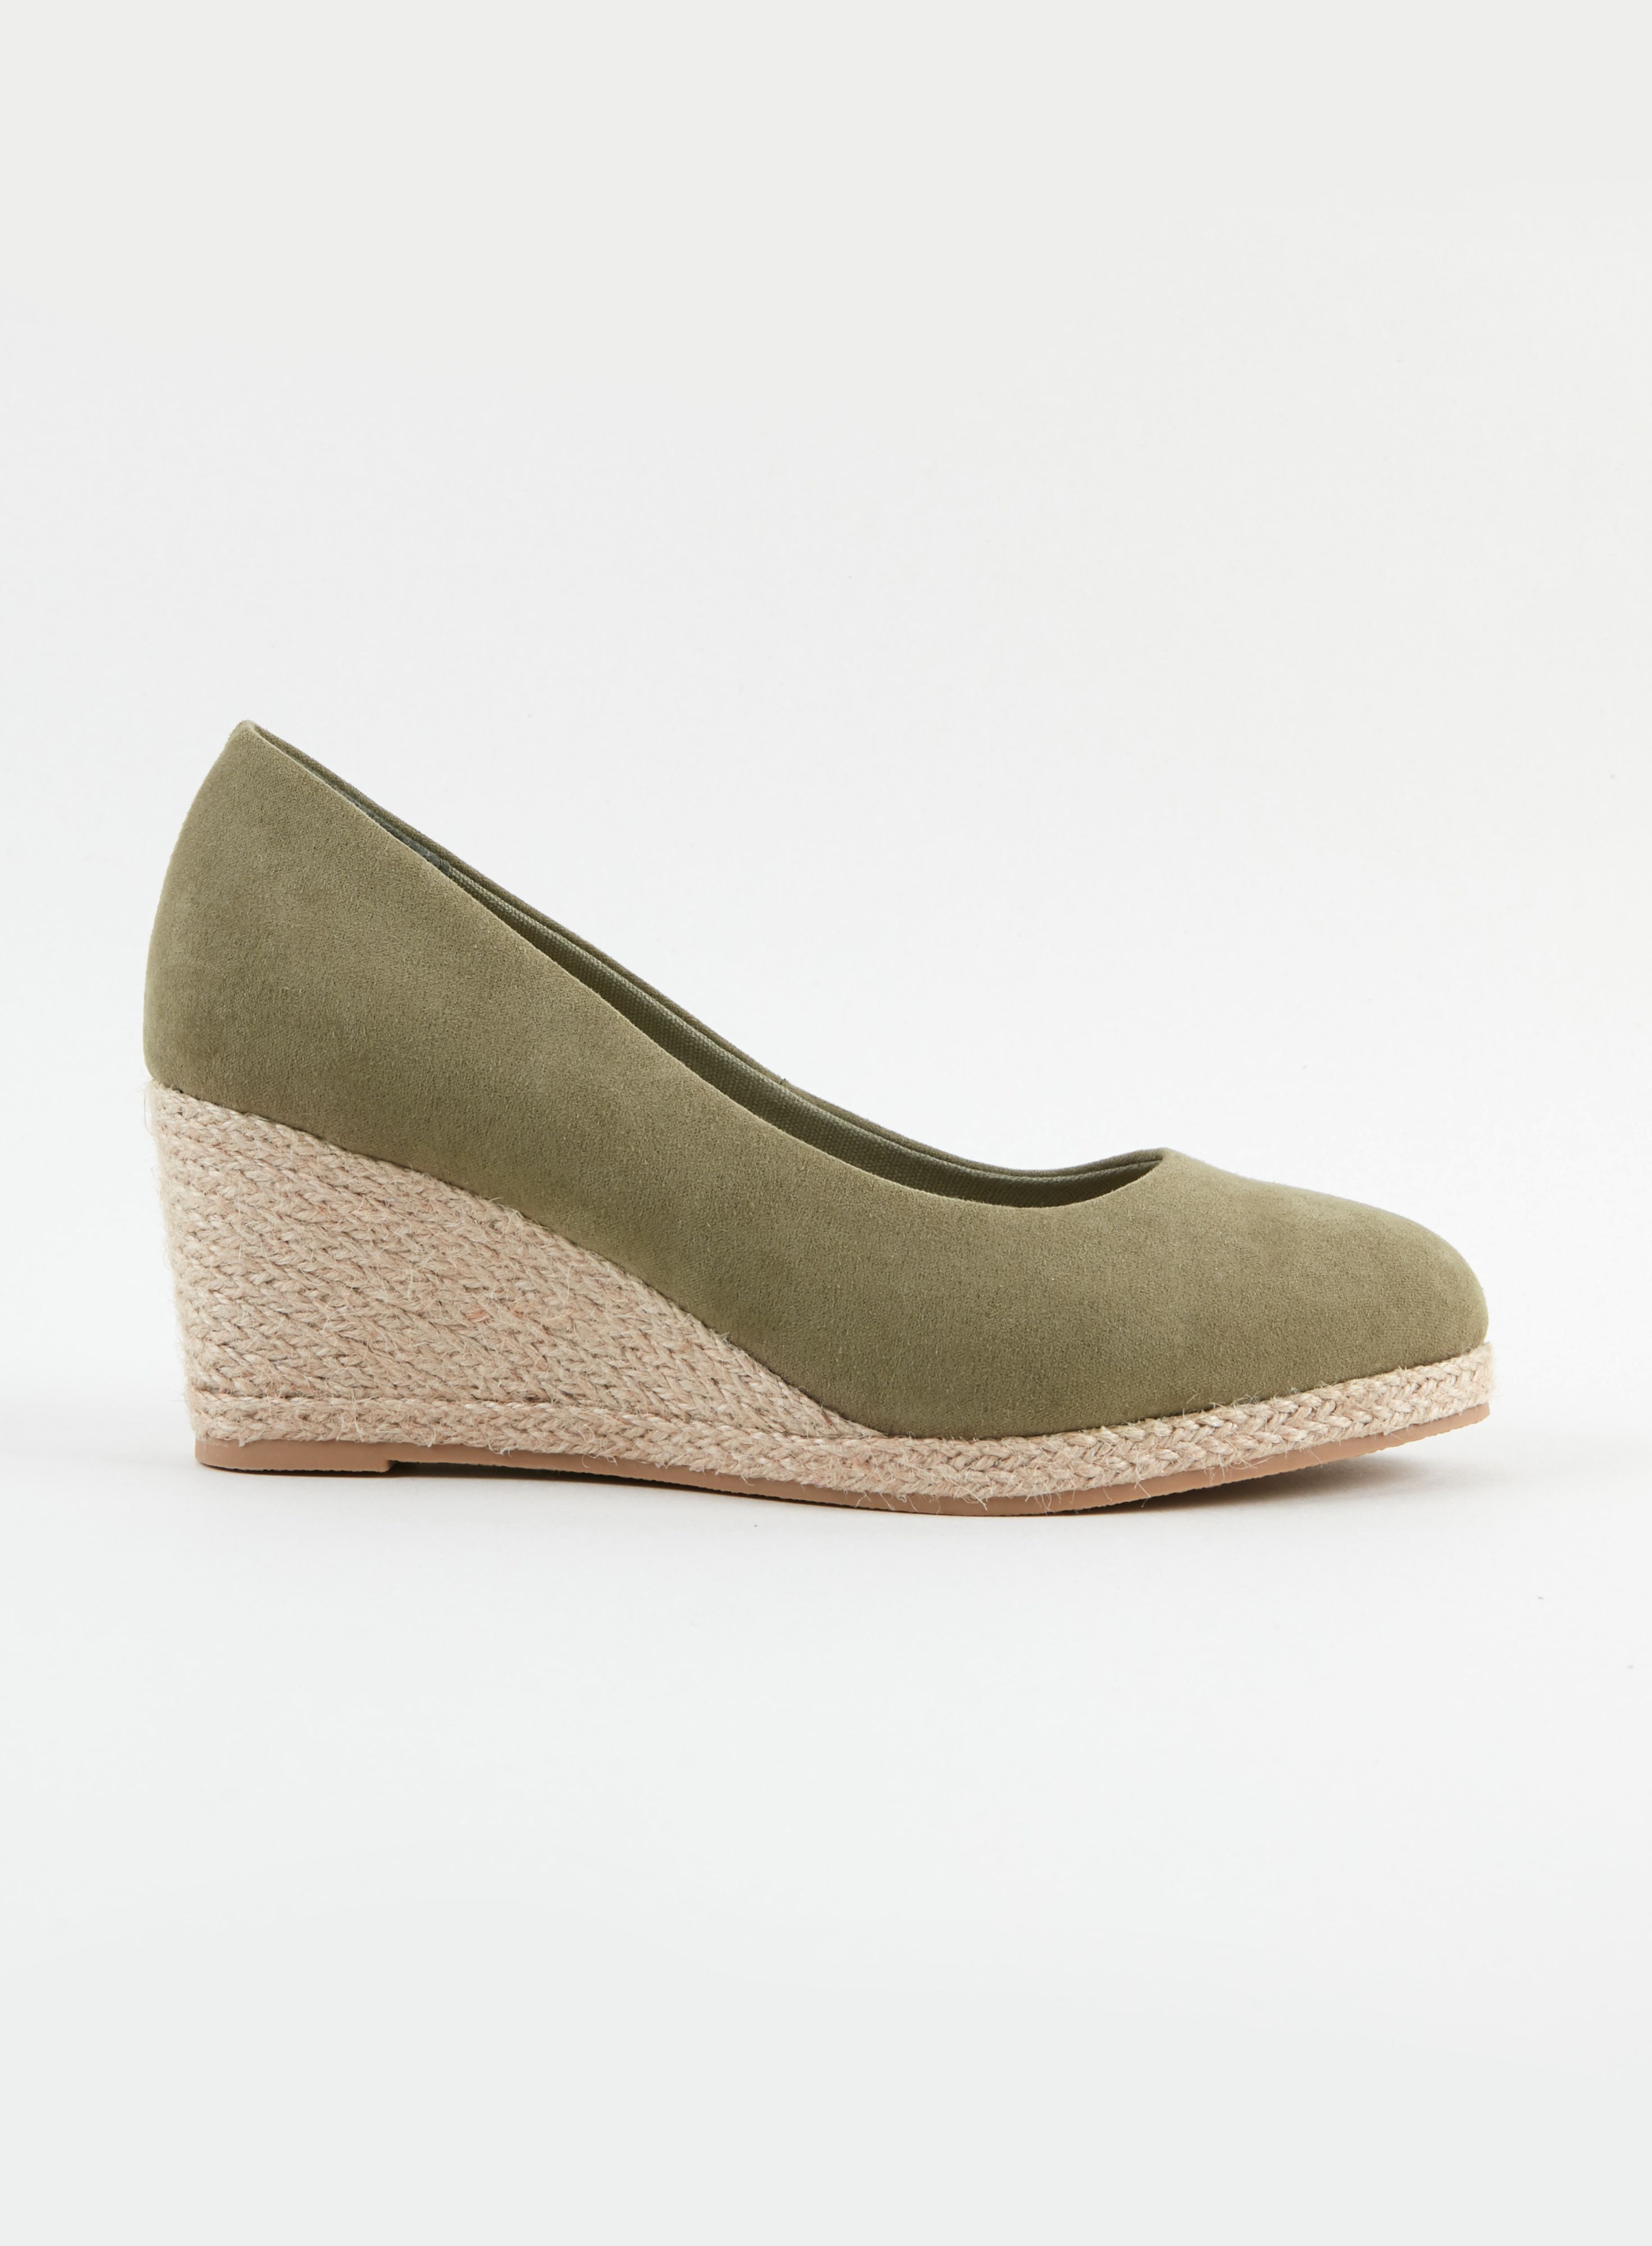 The stylish shoes to add to your collection. Khaki is a must-have for your new-season wardrobe, whilst espadrille detailing keeps these casual and brings added style.  Courts Wedges 100% Textile  Machine washable